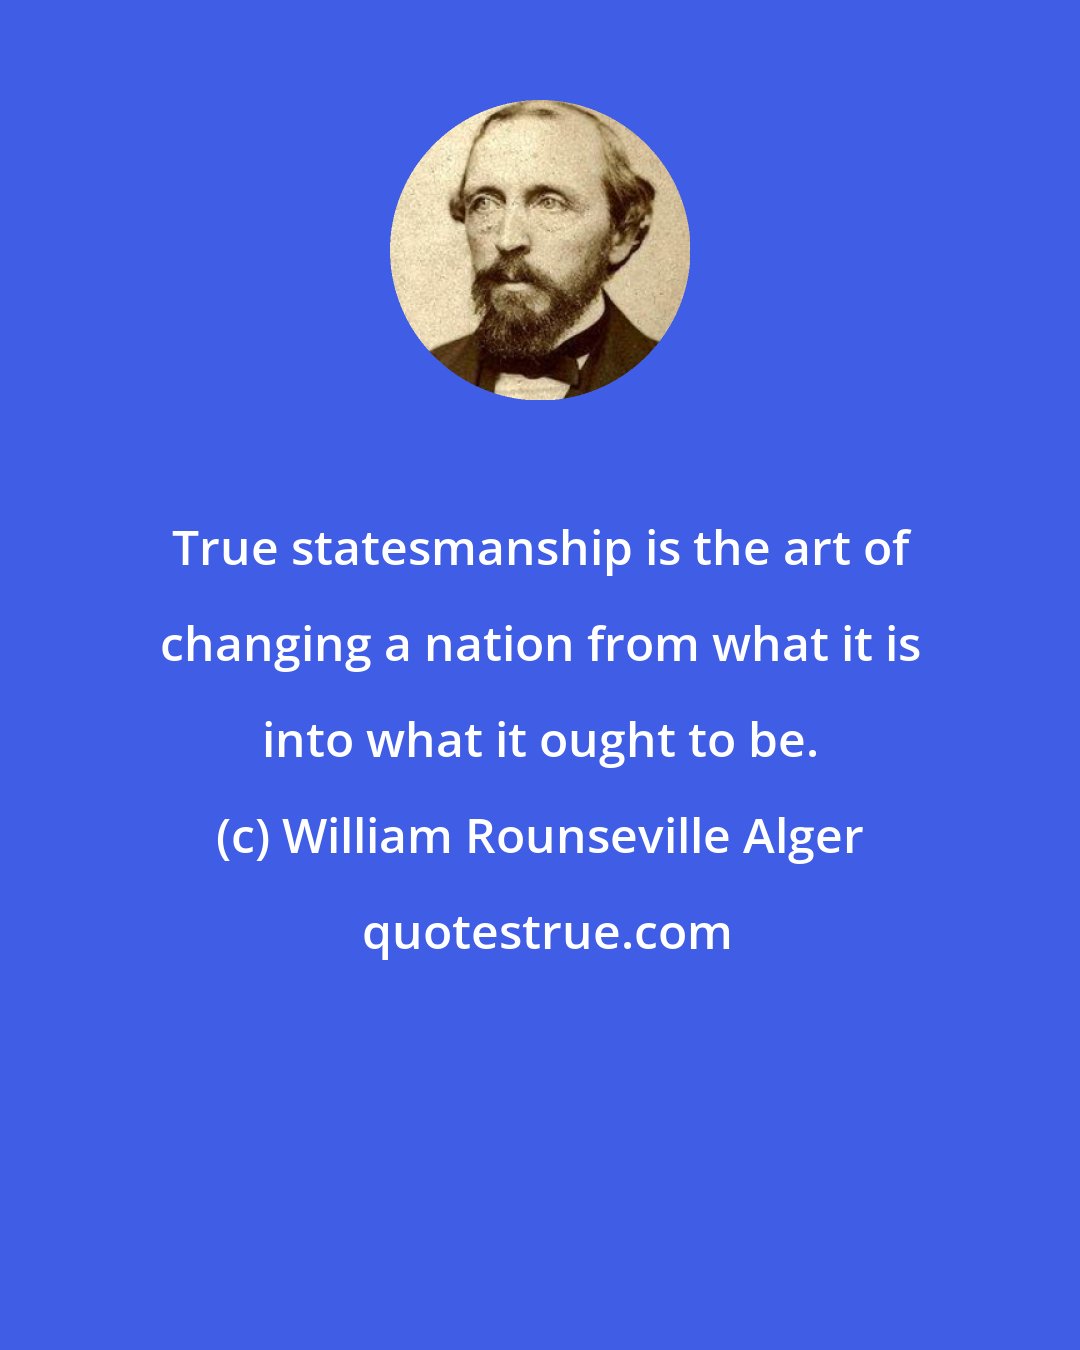 William Rounseville Alger: True statesmanship is the art of changing a nation from what it is into what it ought to be.